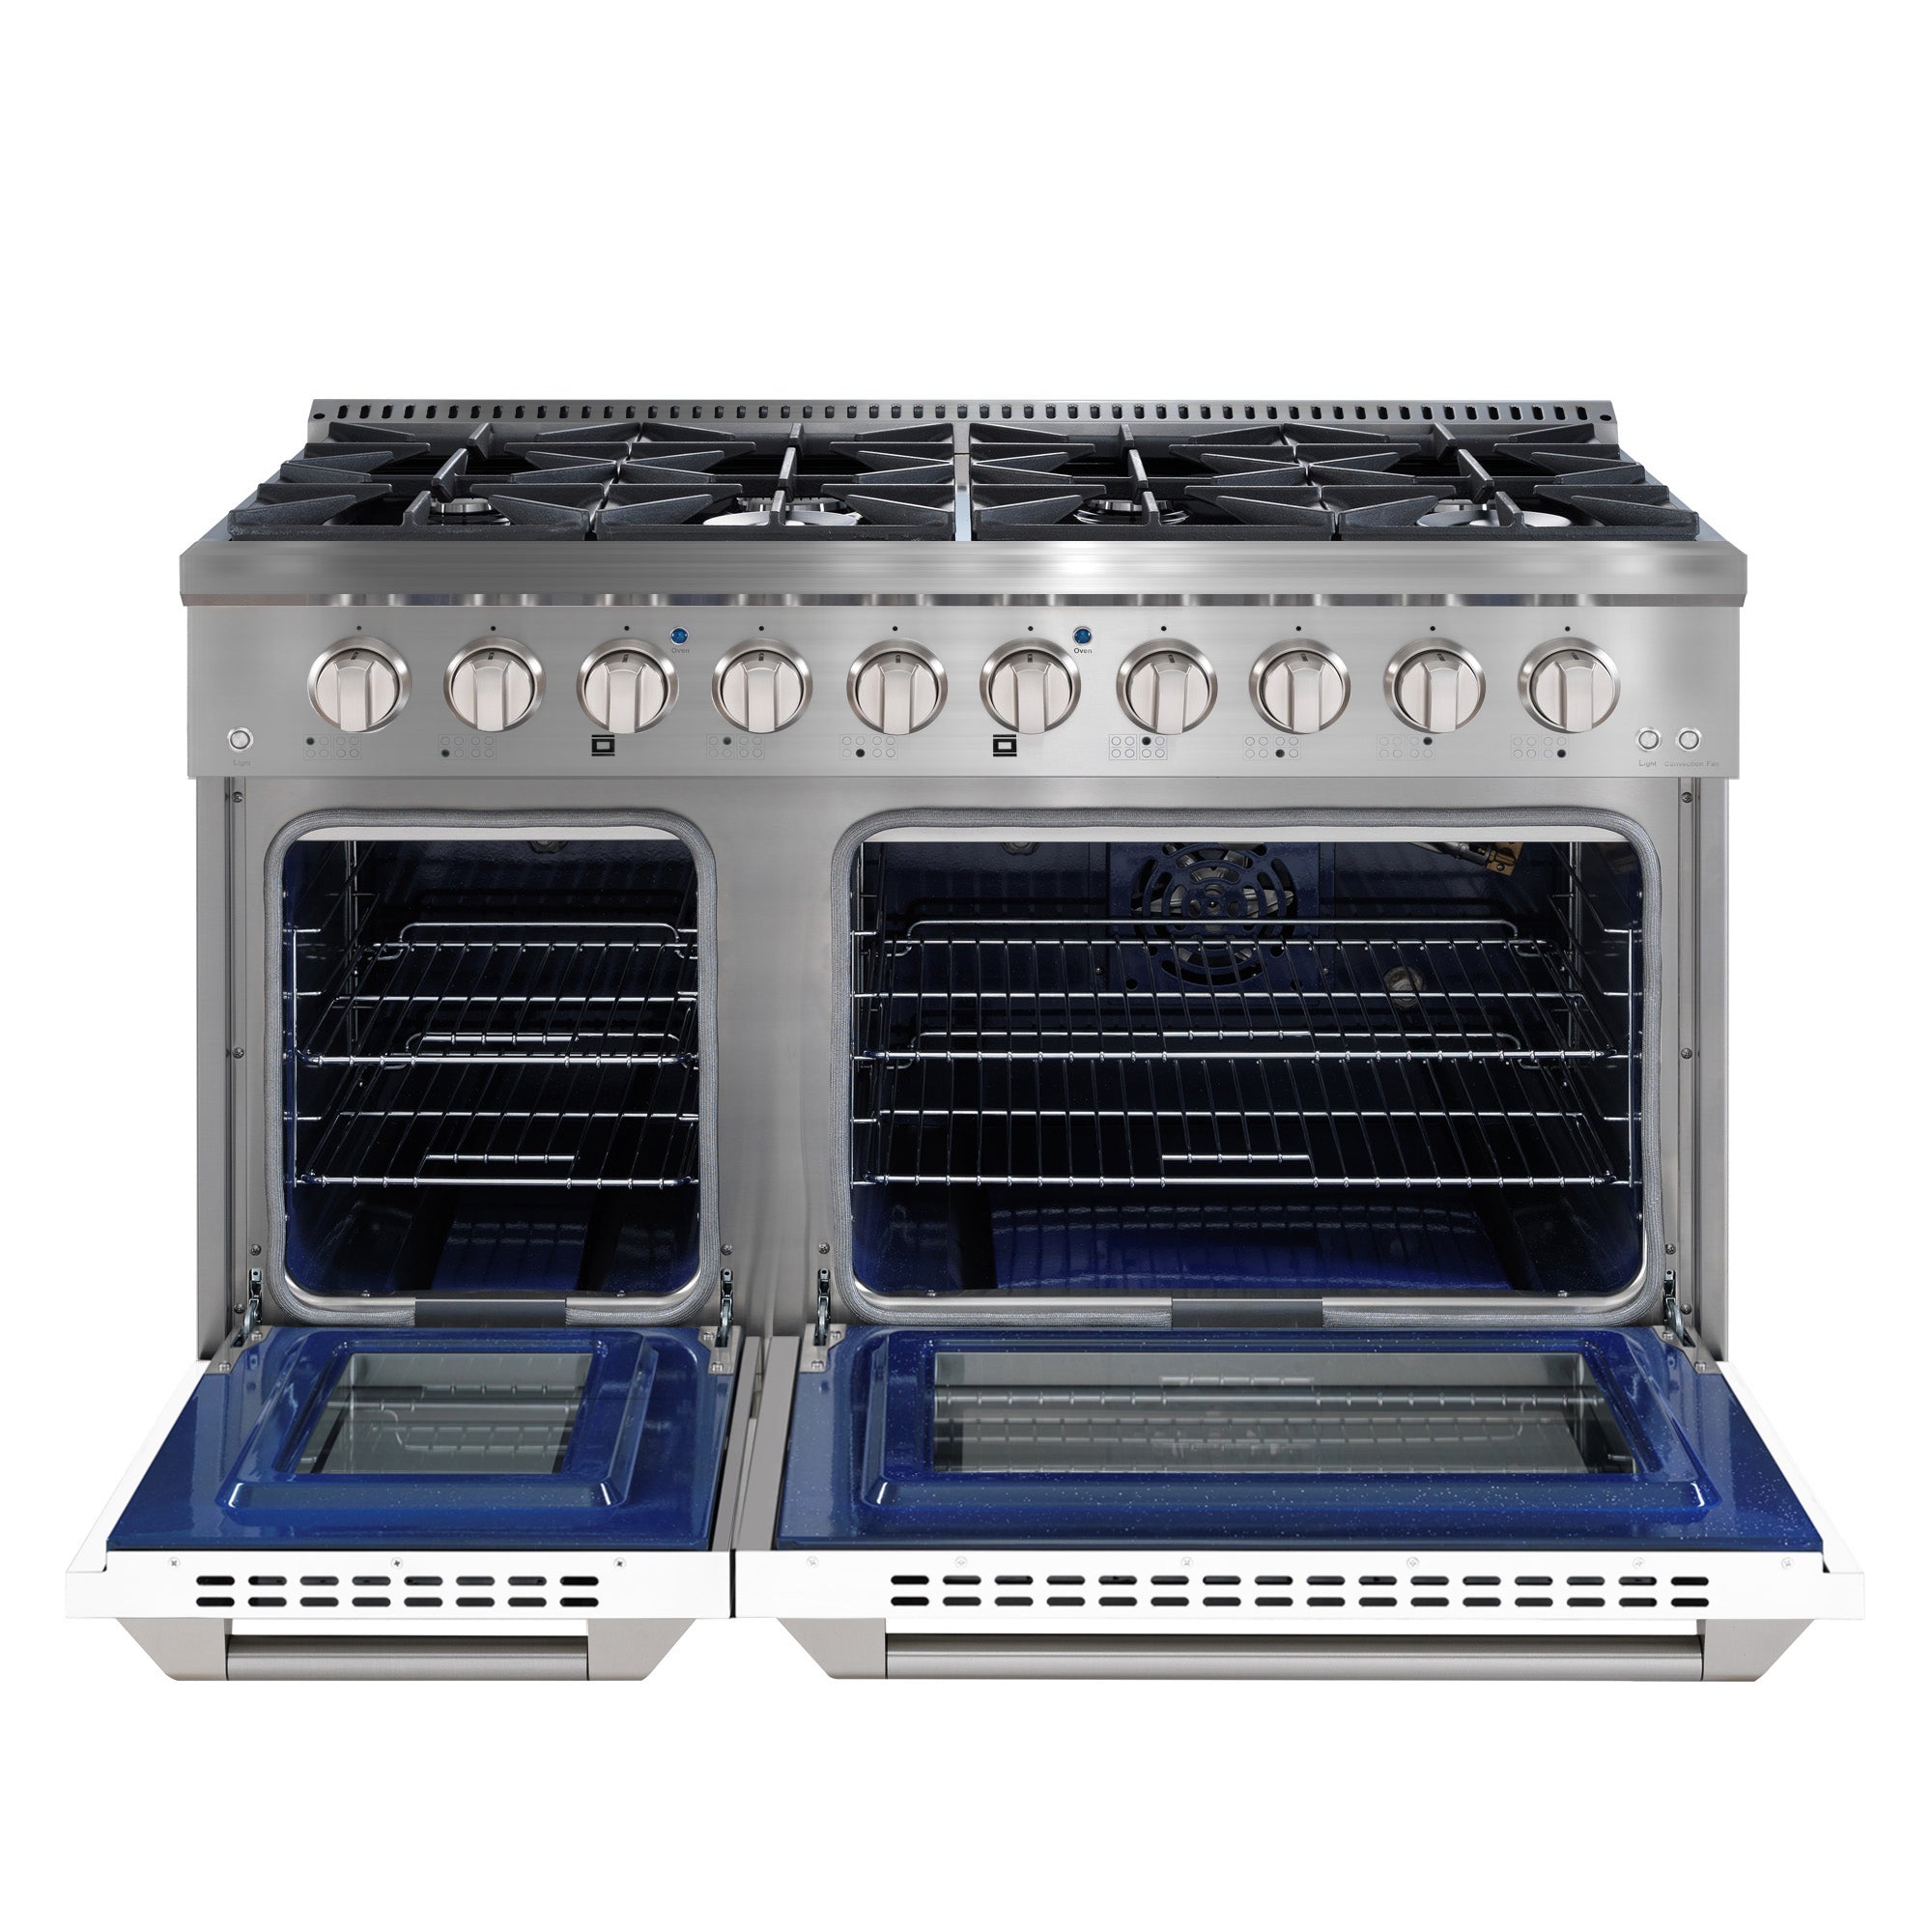 Ancona 48” Gas Range with 8 Burners including Griddle and Double Convection Oven in Stainless Steel with White Doors